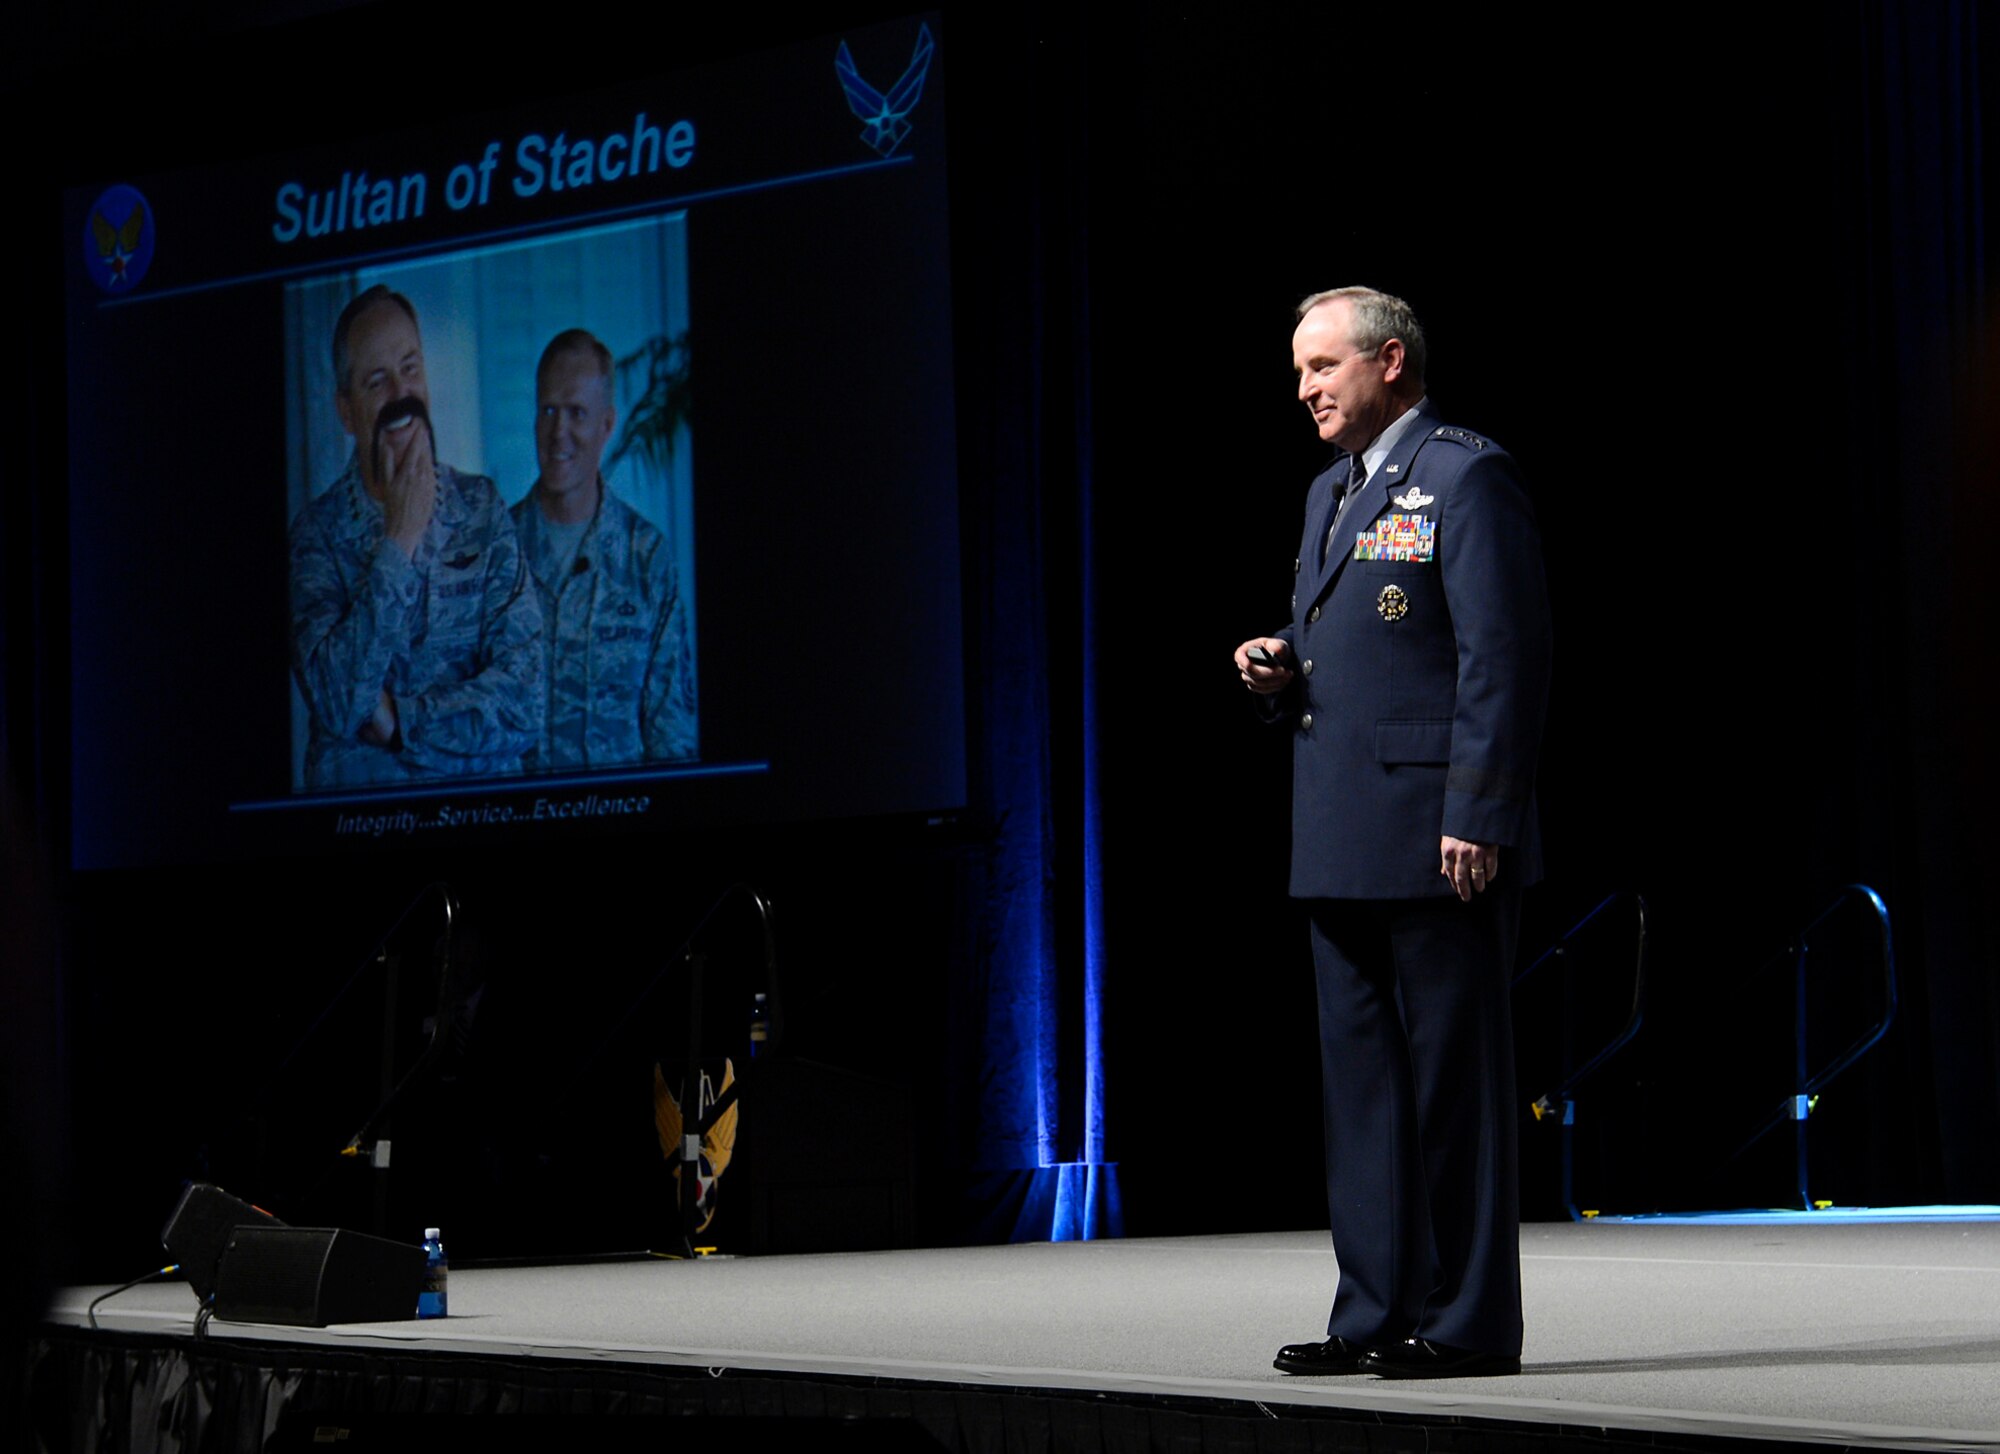 ir Force Chief of Staff Gen. Mark A. Welsh III delivers his keynote speech Feb. 20, 2014, at the 30th Annual AFA Air Warfare Symposium and Technology Exposition in Orlando, Fla. Welsh talked about focusing on the mission, developing and celebrating Airmen, strengthening and embracing partnerships, and living our core values. (U.S. Air Force photo/Scott M. Ash)